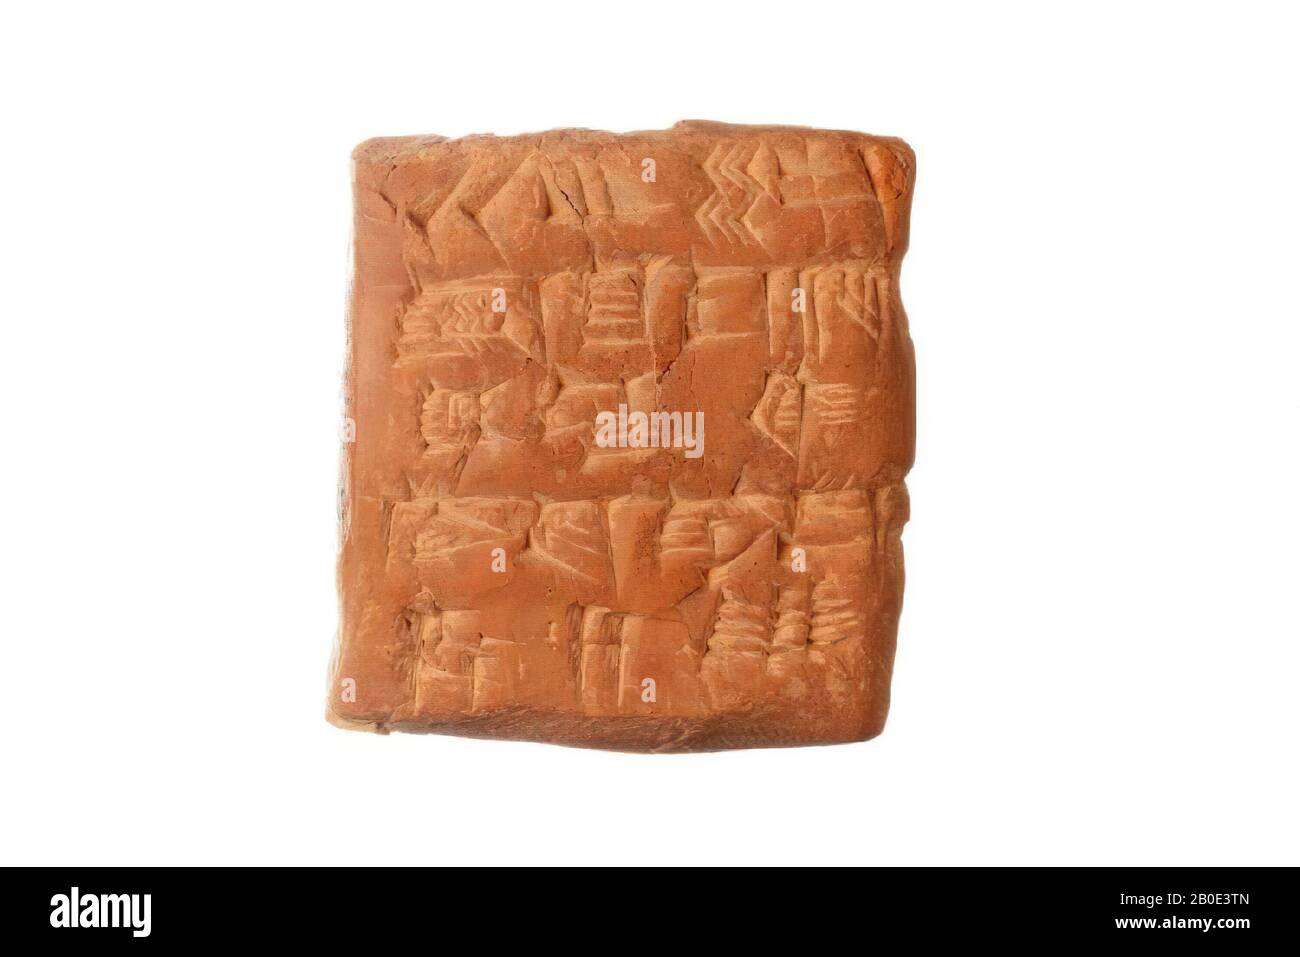 A clay tablet with a cuneiform inscription. The text is an acknowledgment of receipt for a residual quantity of barley as rental income for farmers., Inscription, pottery, clay, L 3.8 cm, B 3.6 cm, H 1.7 cm, Ur III Period 2112-2004 BC, Iraq Stock Photo